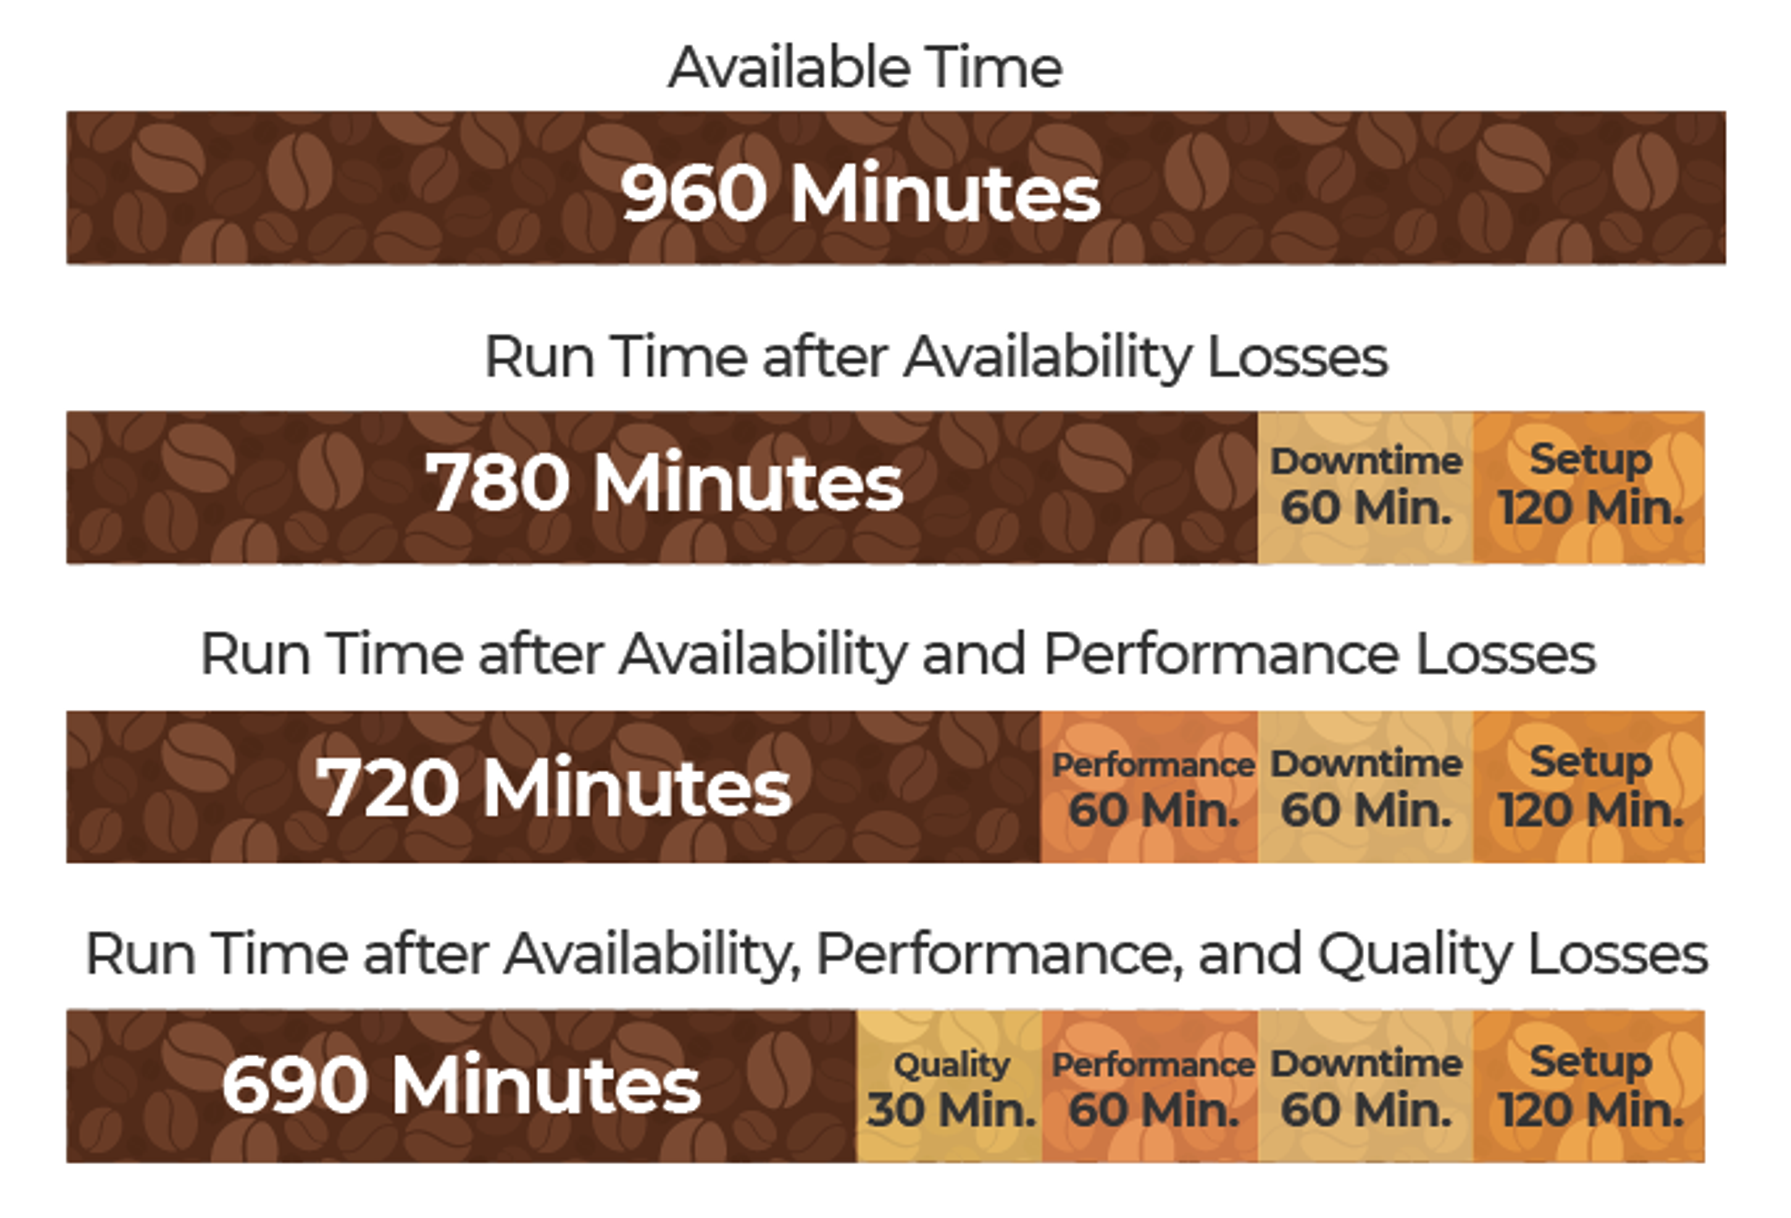 Run Time after Availability, Performance, and Quality Losses: 690 Minutes